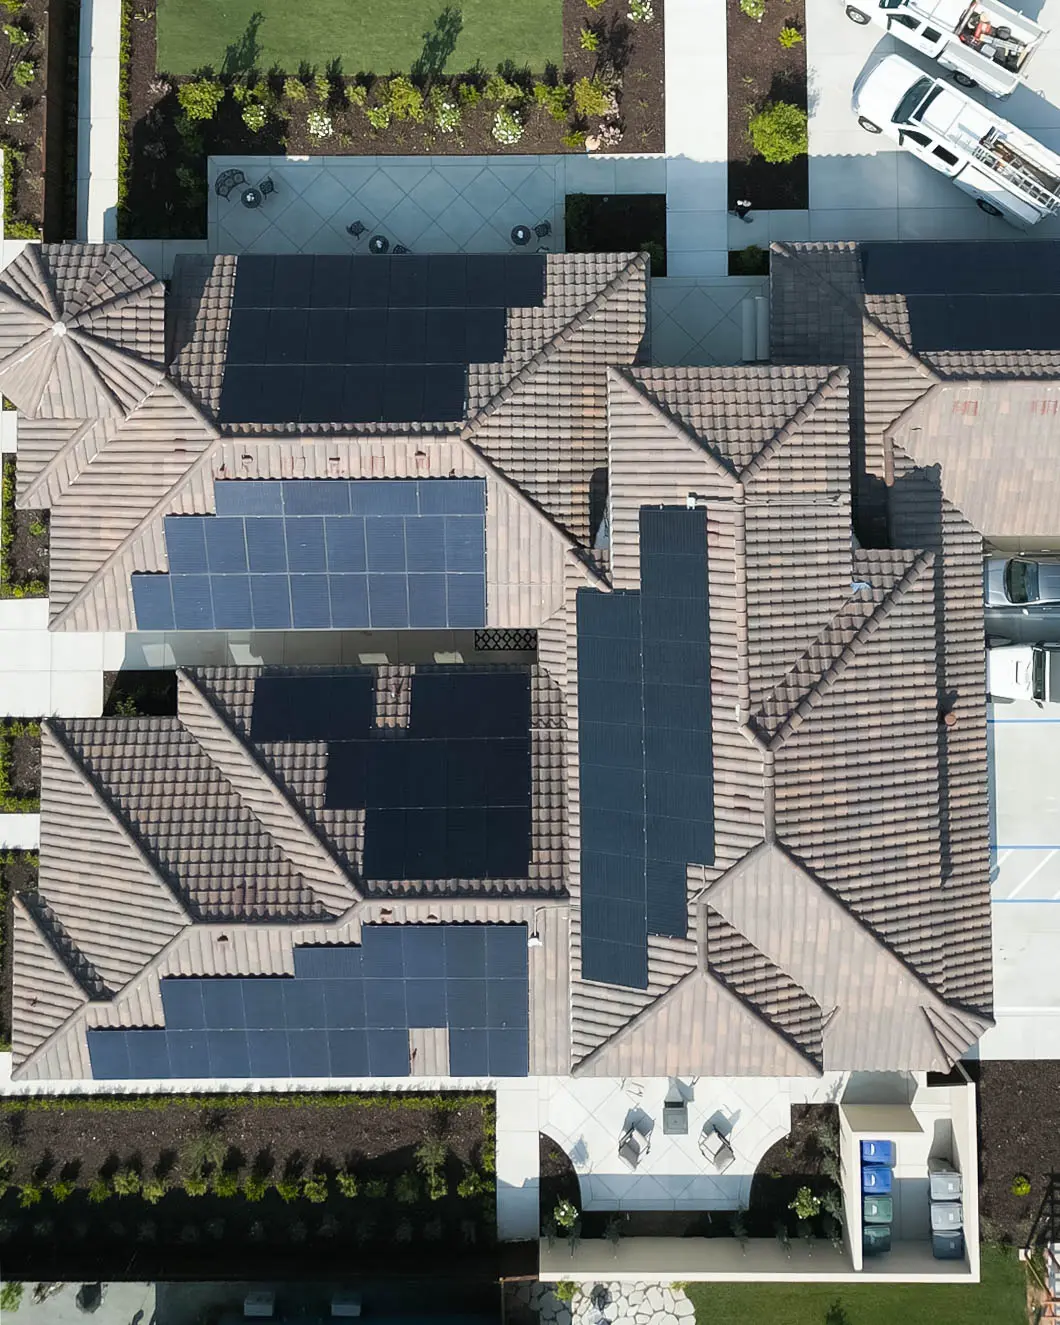 A view of a roof with many solar panels on it.